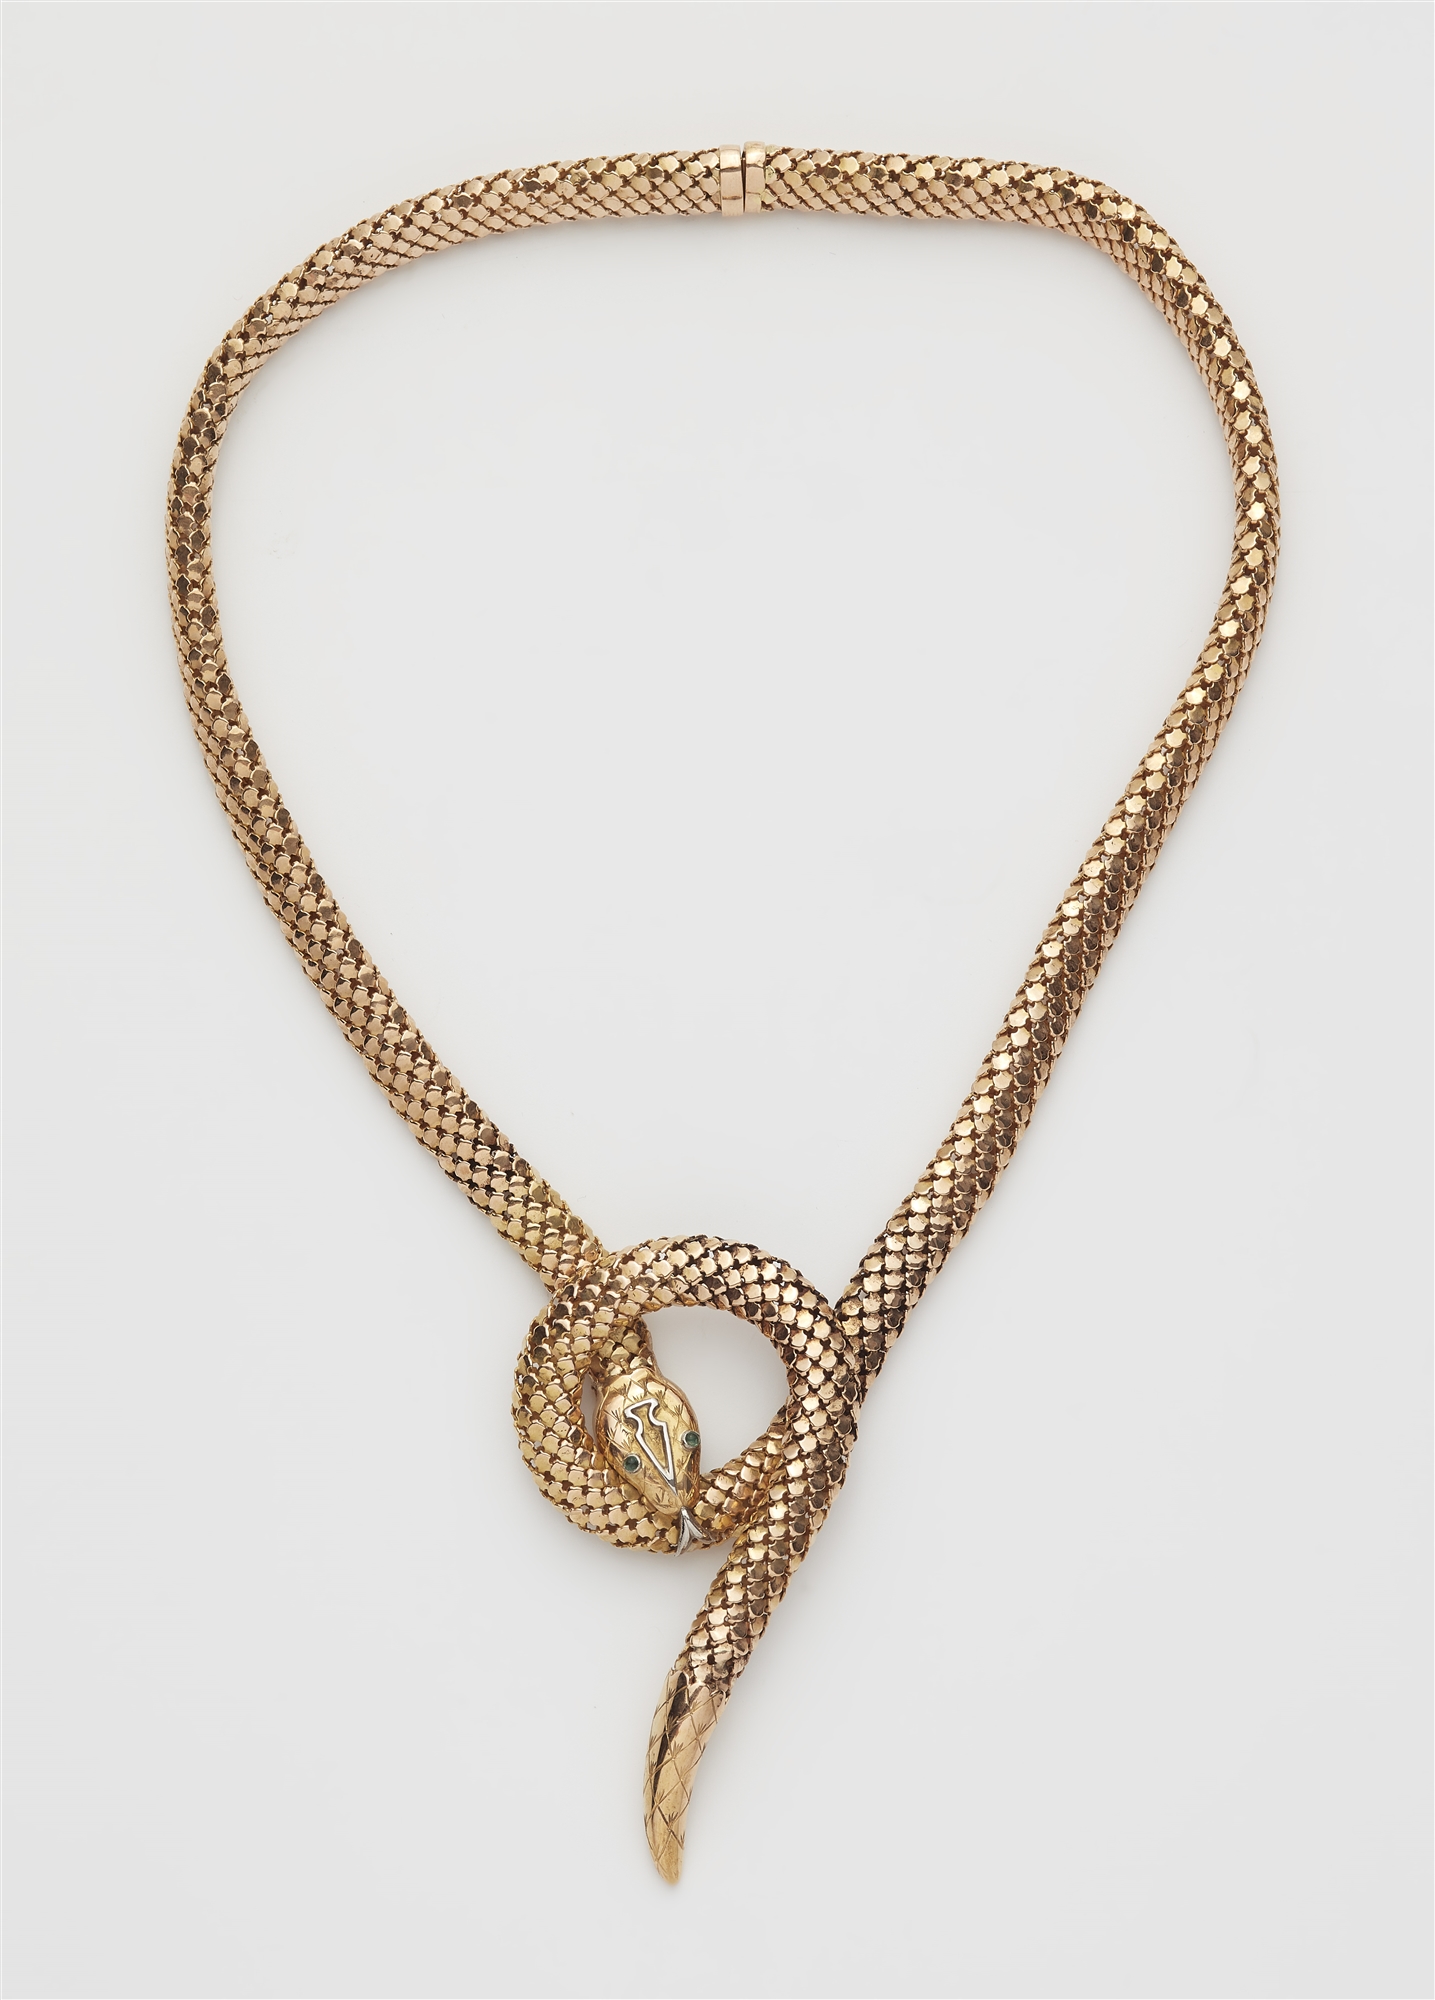 A flexible 18k red gold tubogaz snake necklace with emerald eyes.